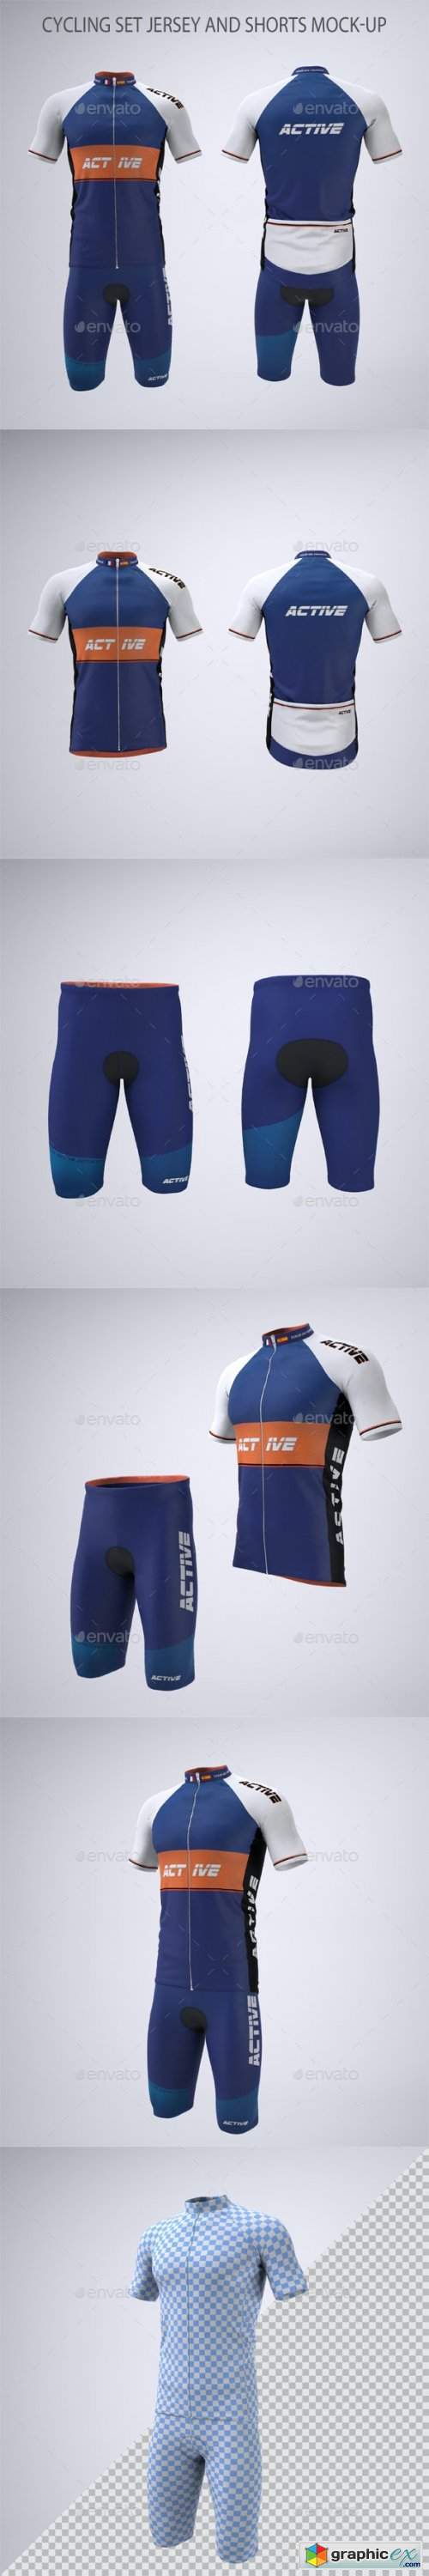 Download Cycling Set Jersey and Shorts Mock-up » Free Download ...